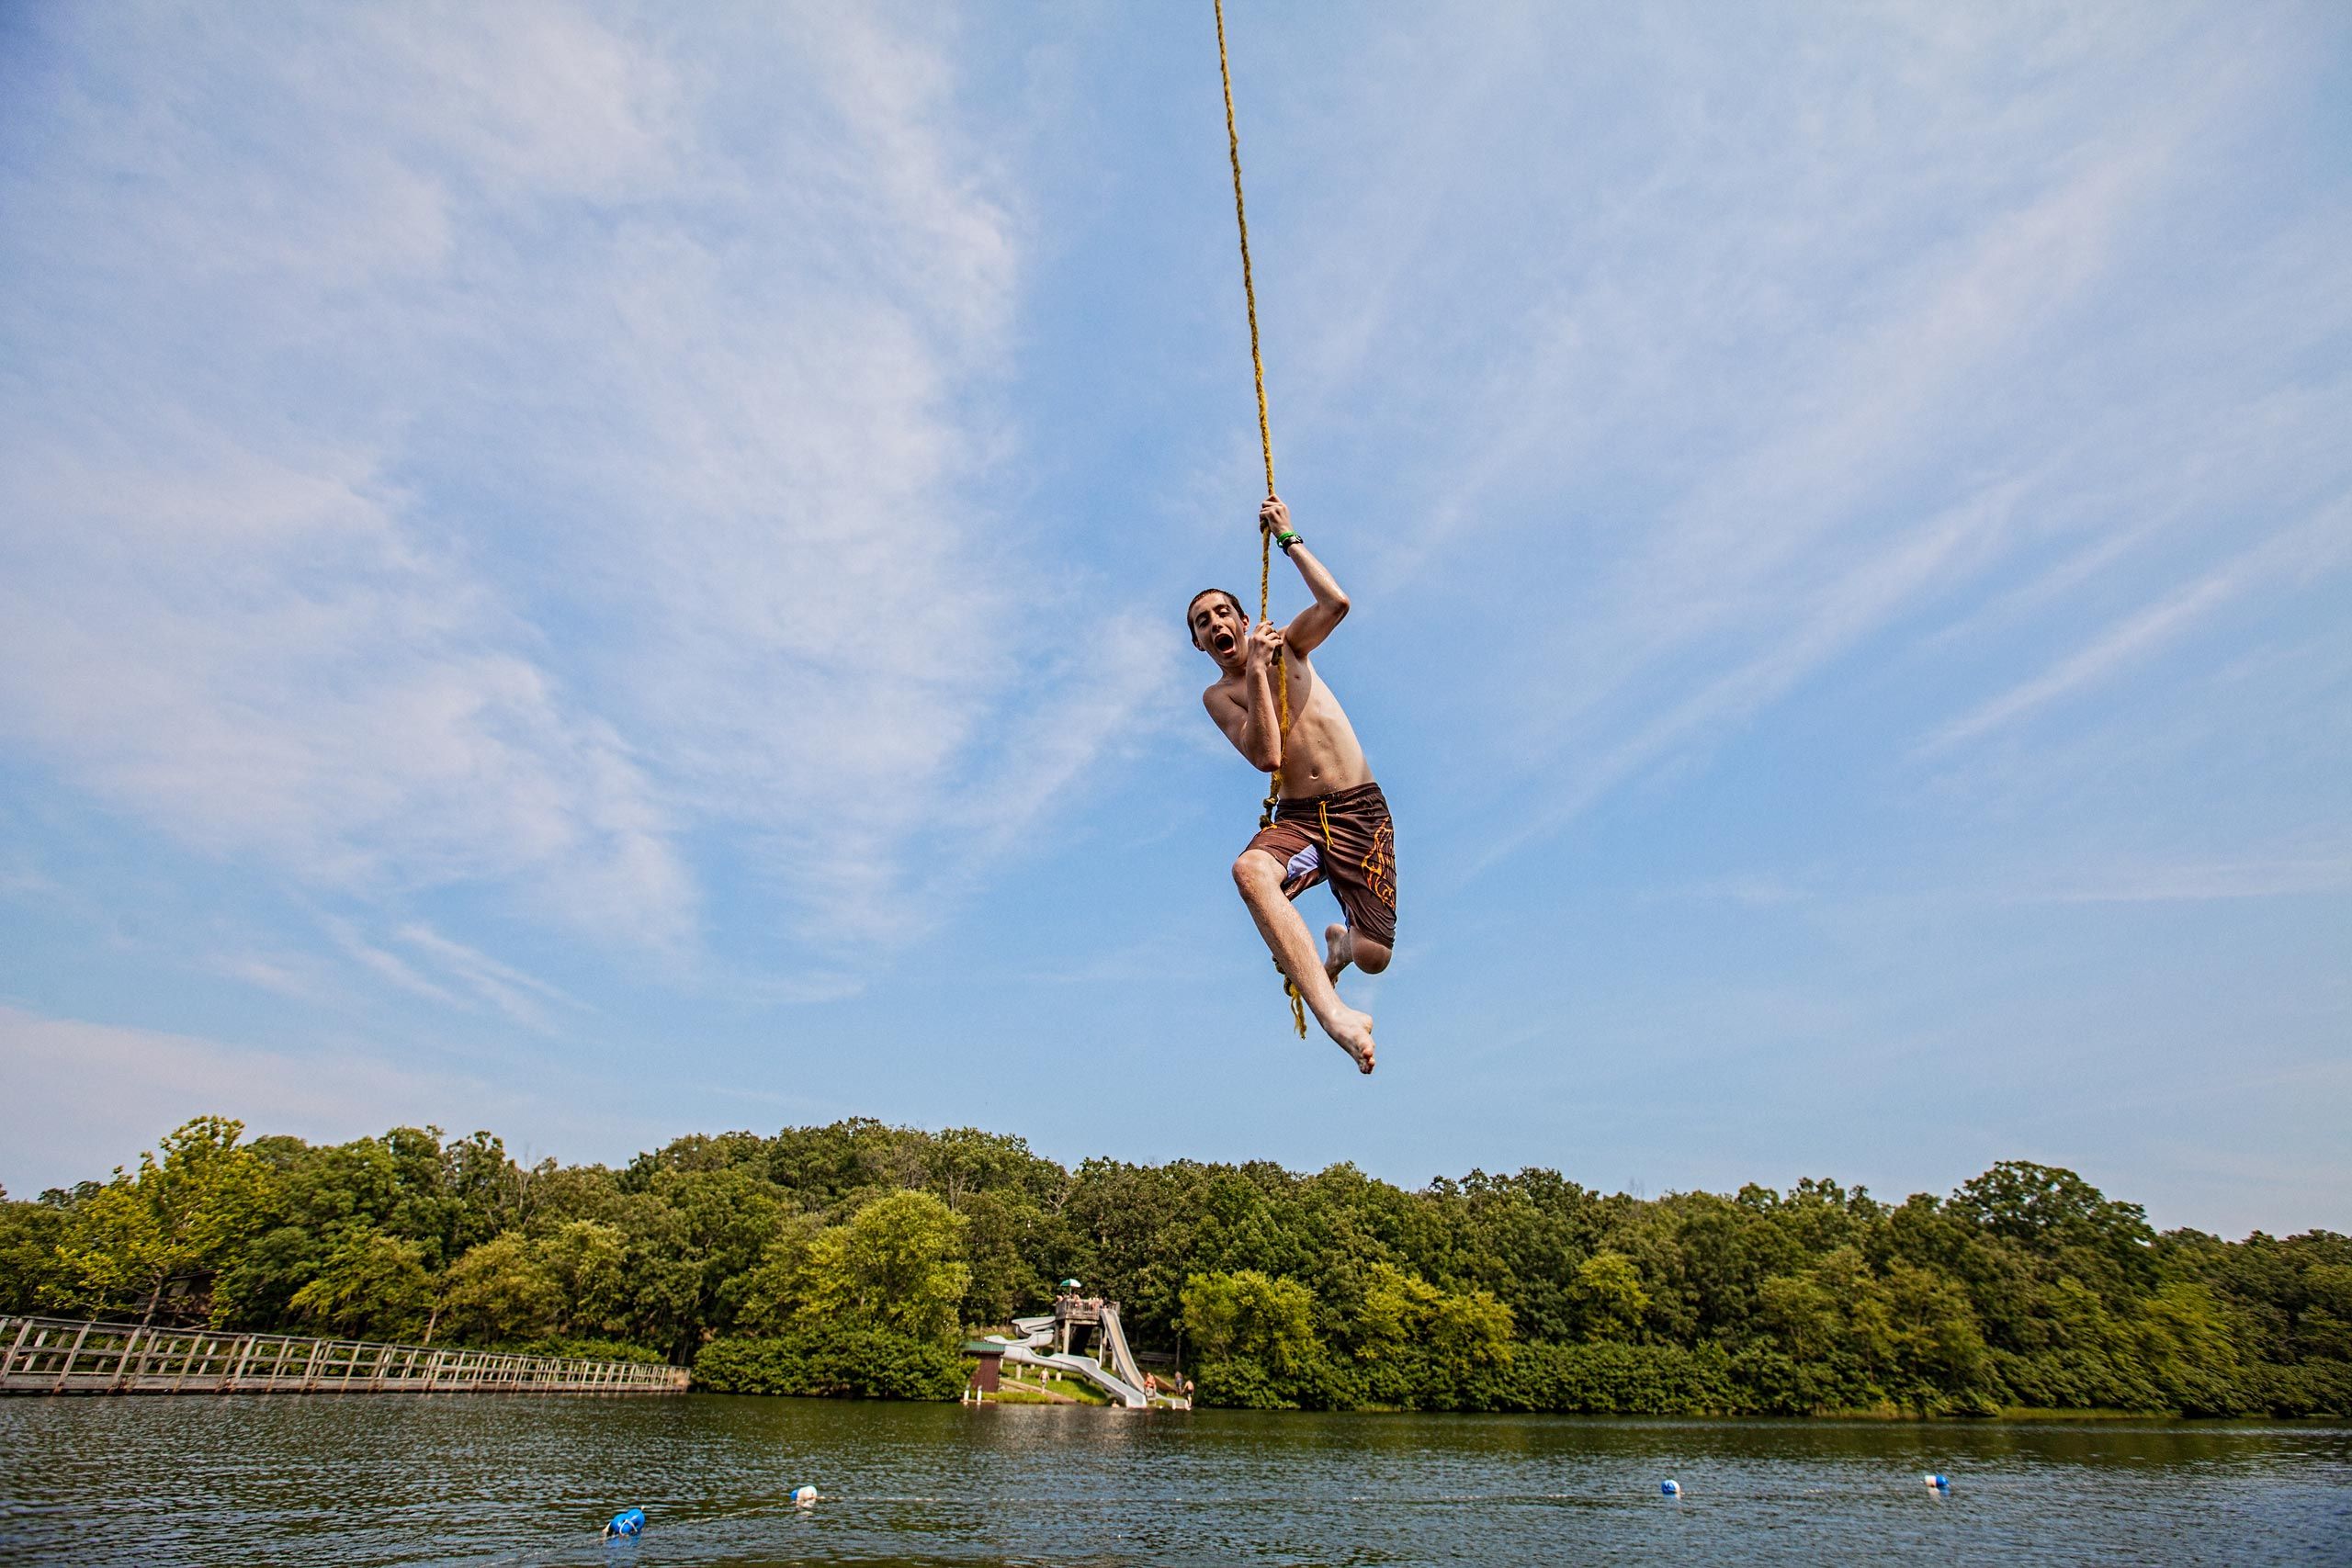 Boy On a Rope Swing Over a Lake